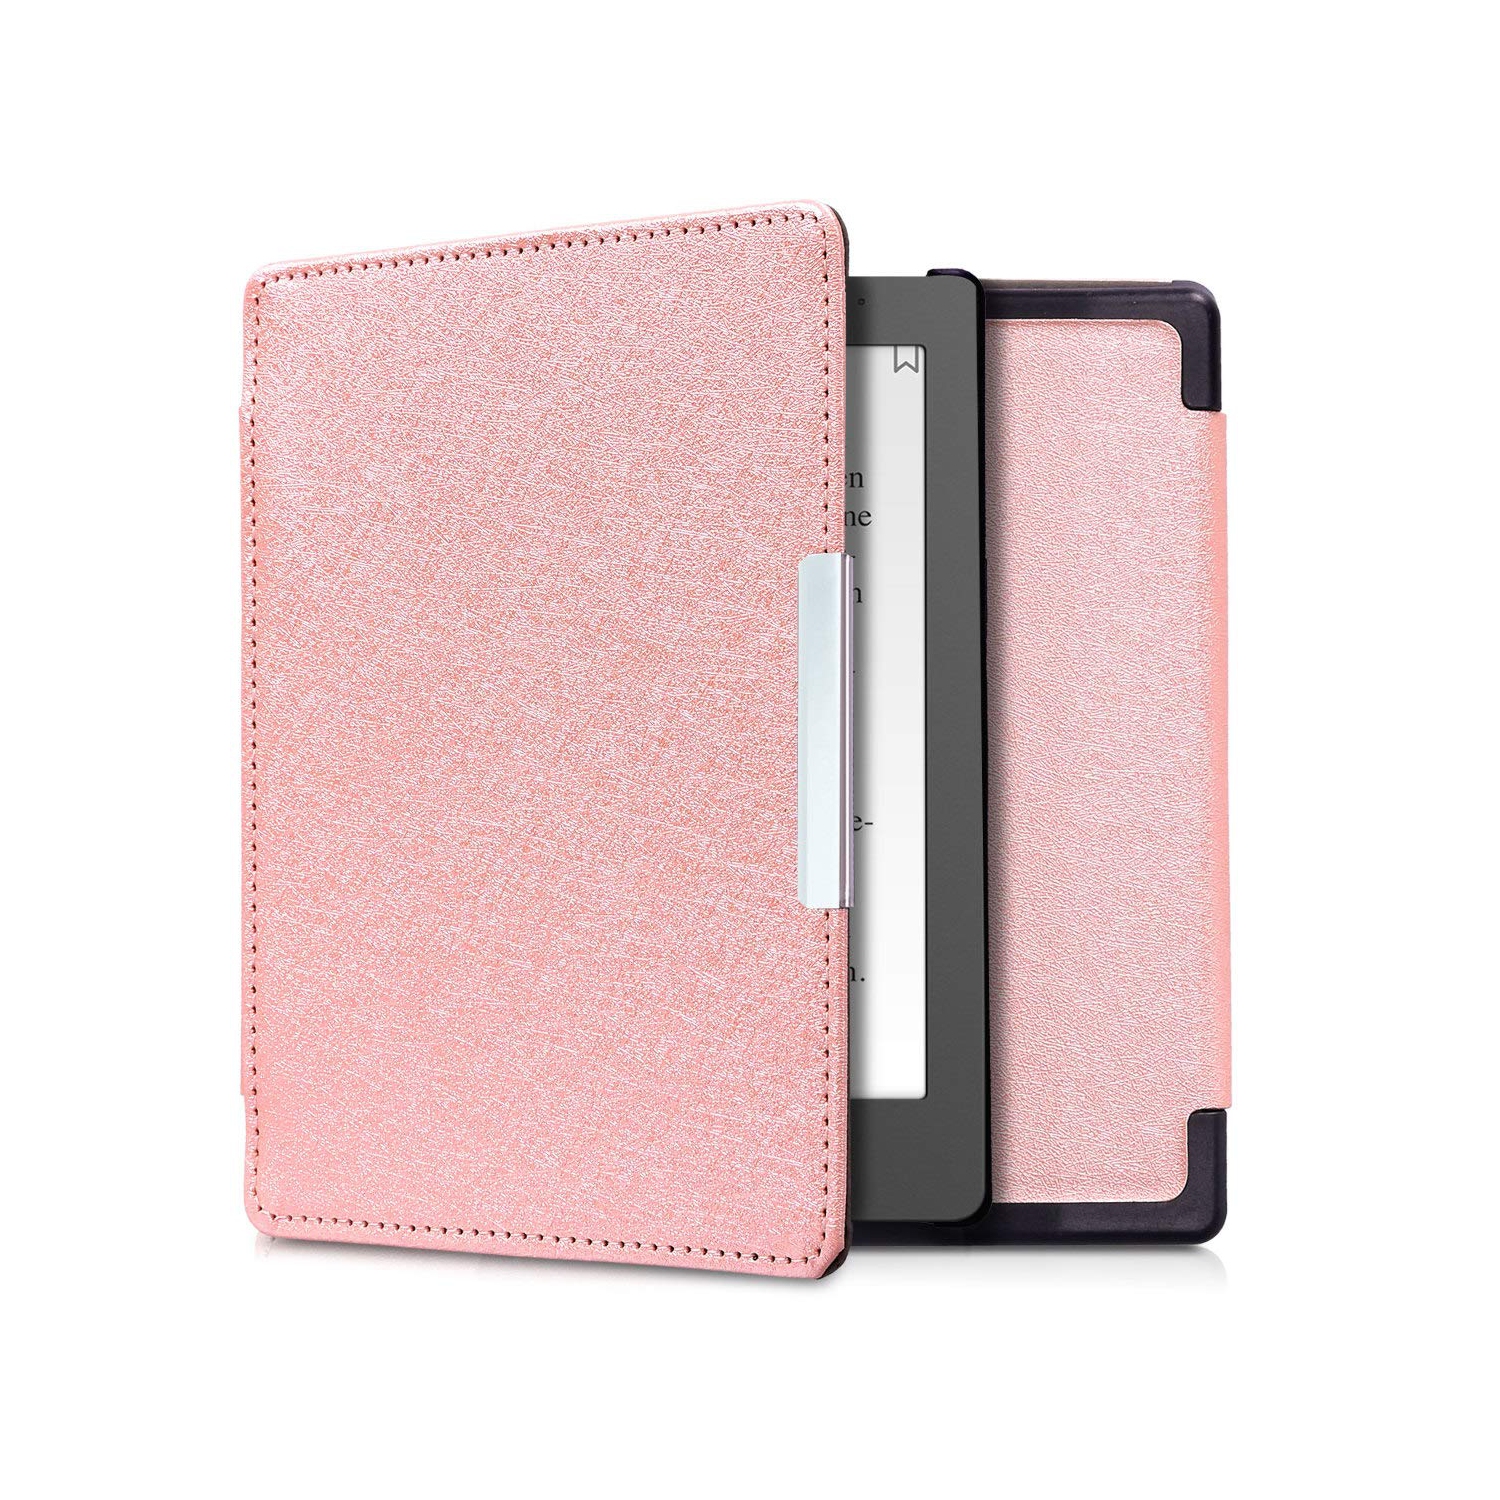 kwmobile Origami Case for Kobo Aura Edition 2 Mint Ultra Slim Fit Premium PU Leather Cover with Stand 